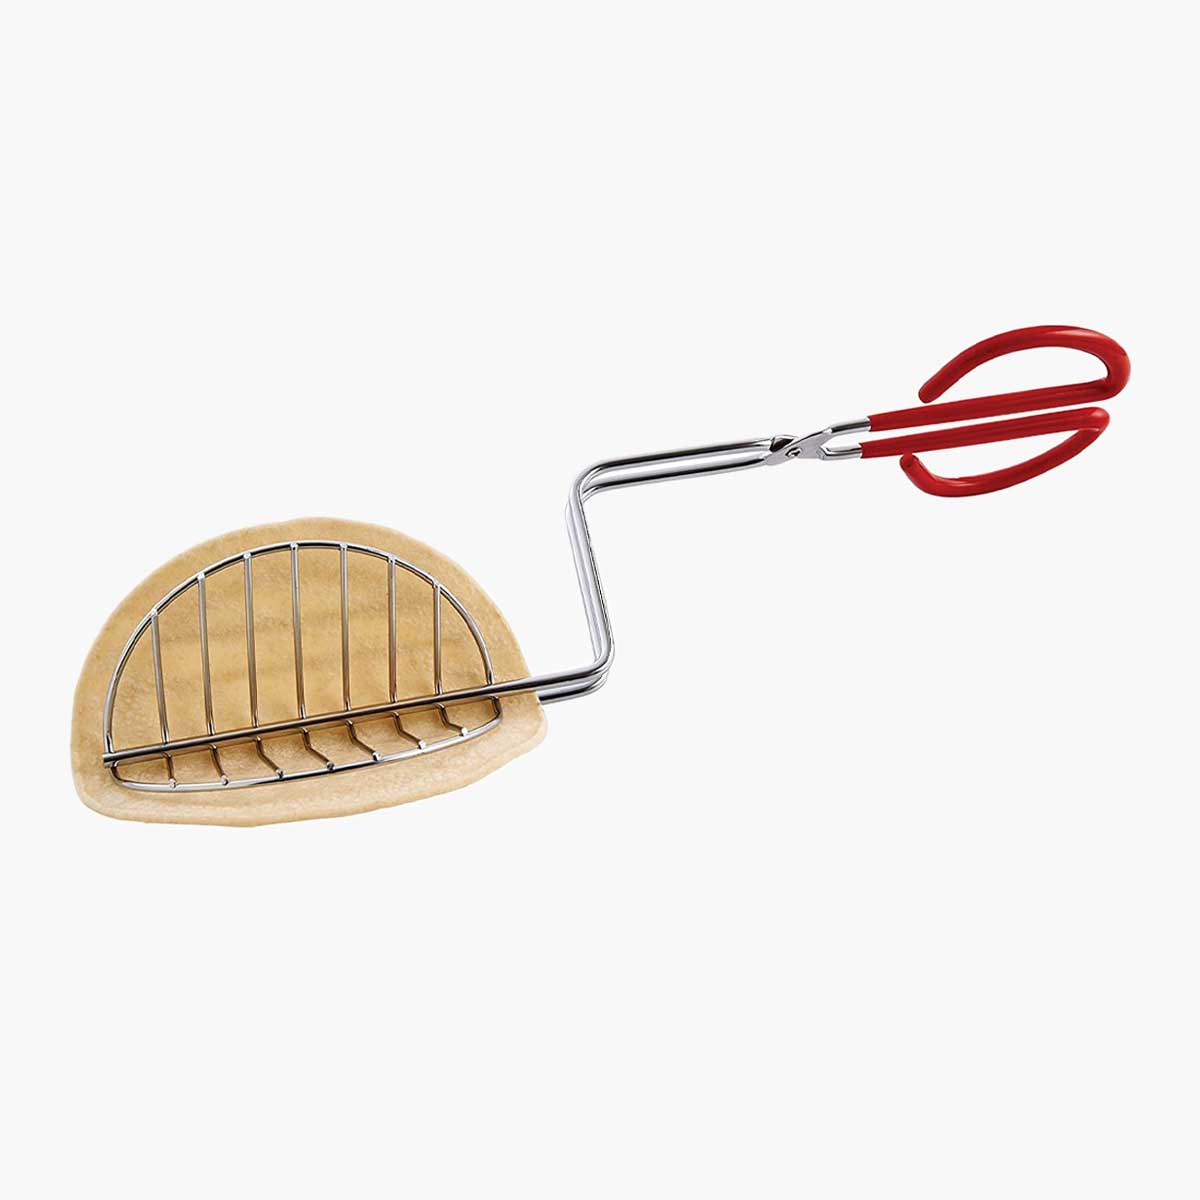 A taco tong, one of the items for everything you could possibly need for taco night at home.